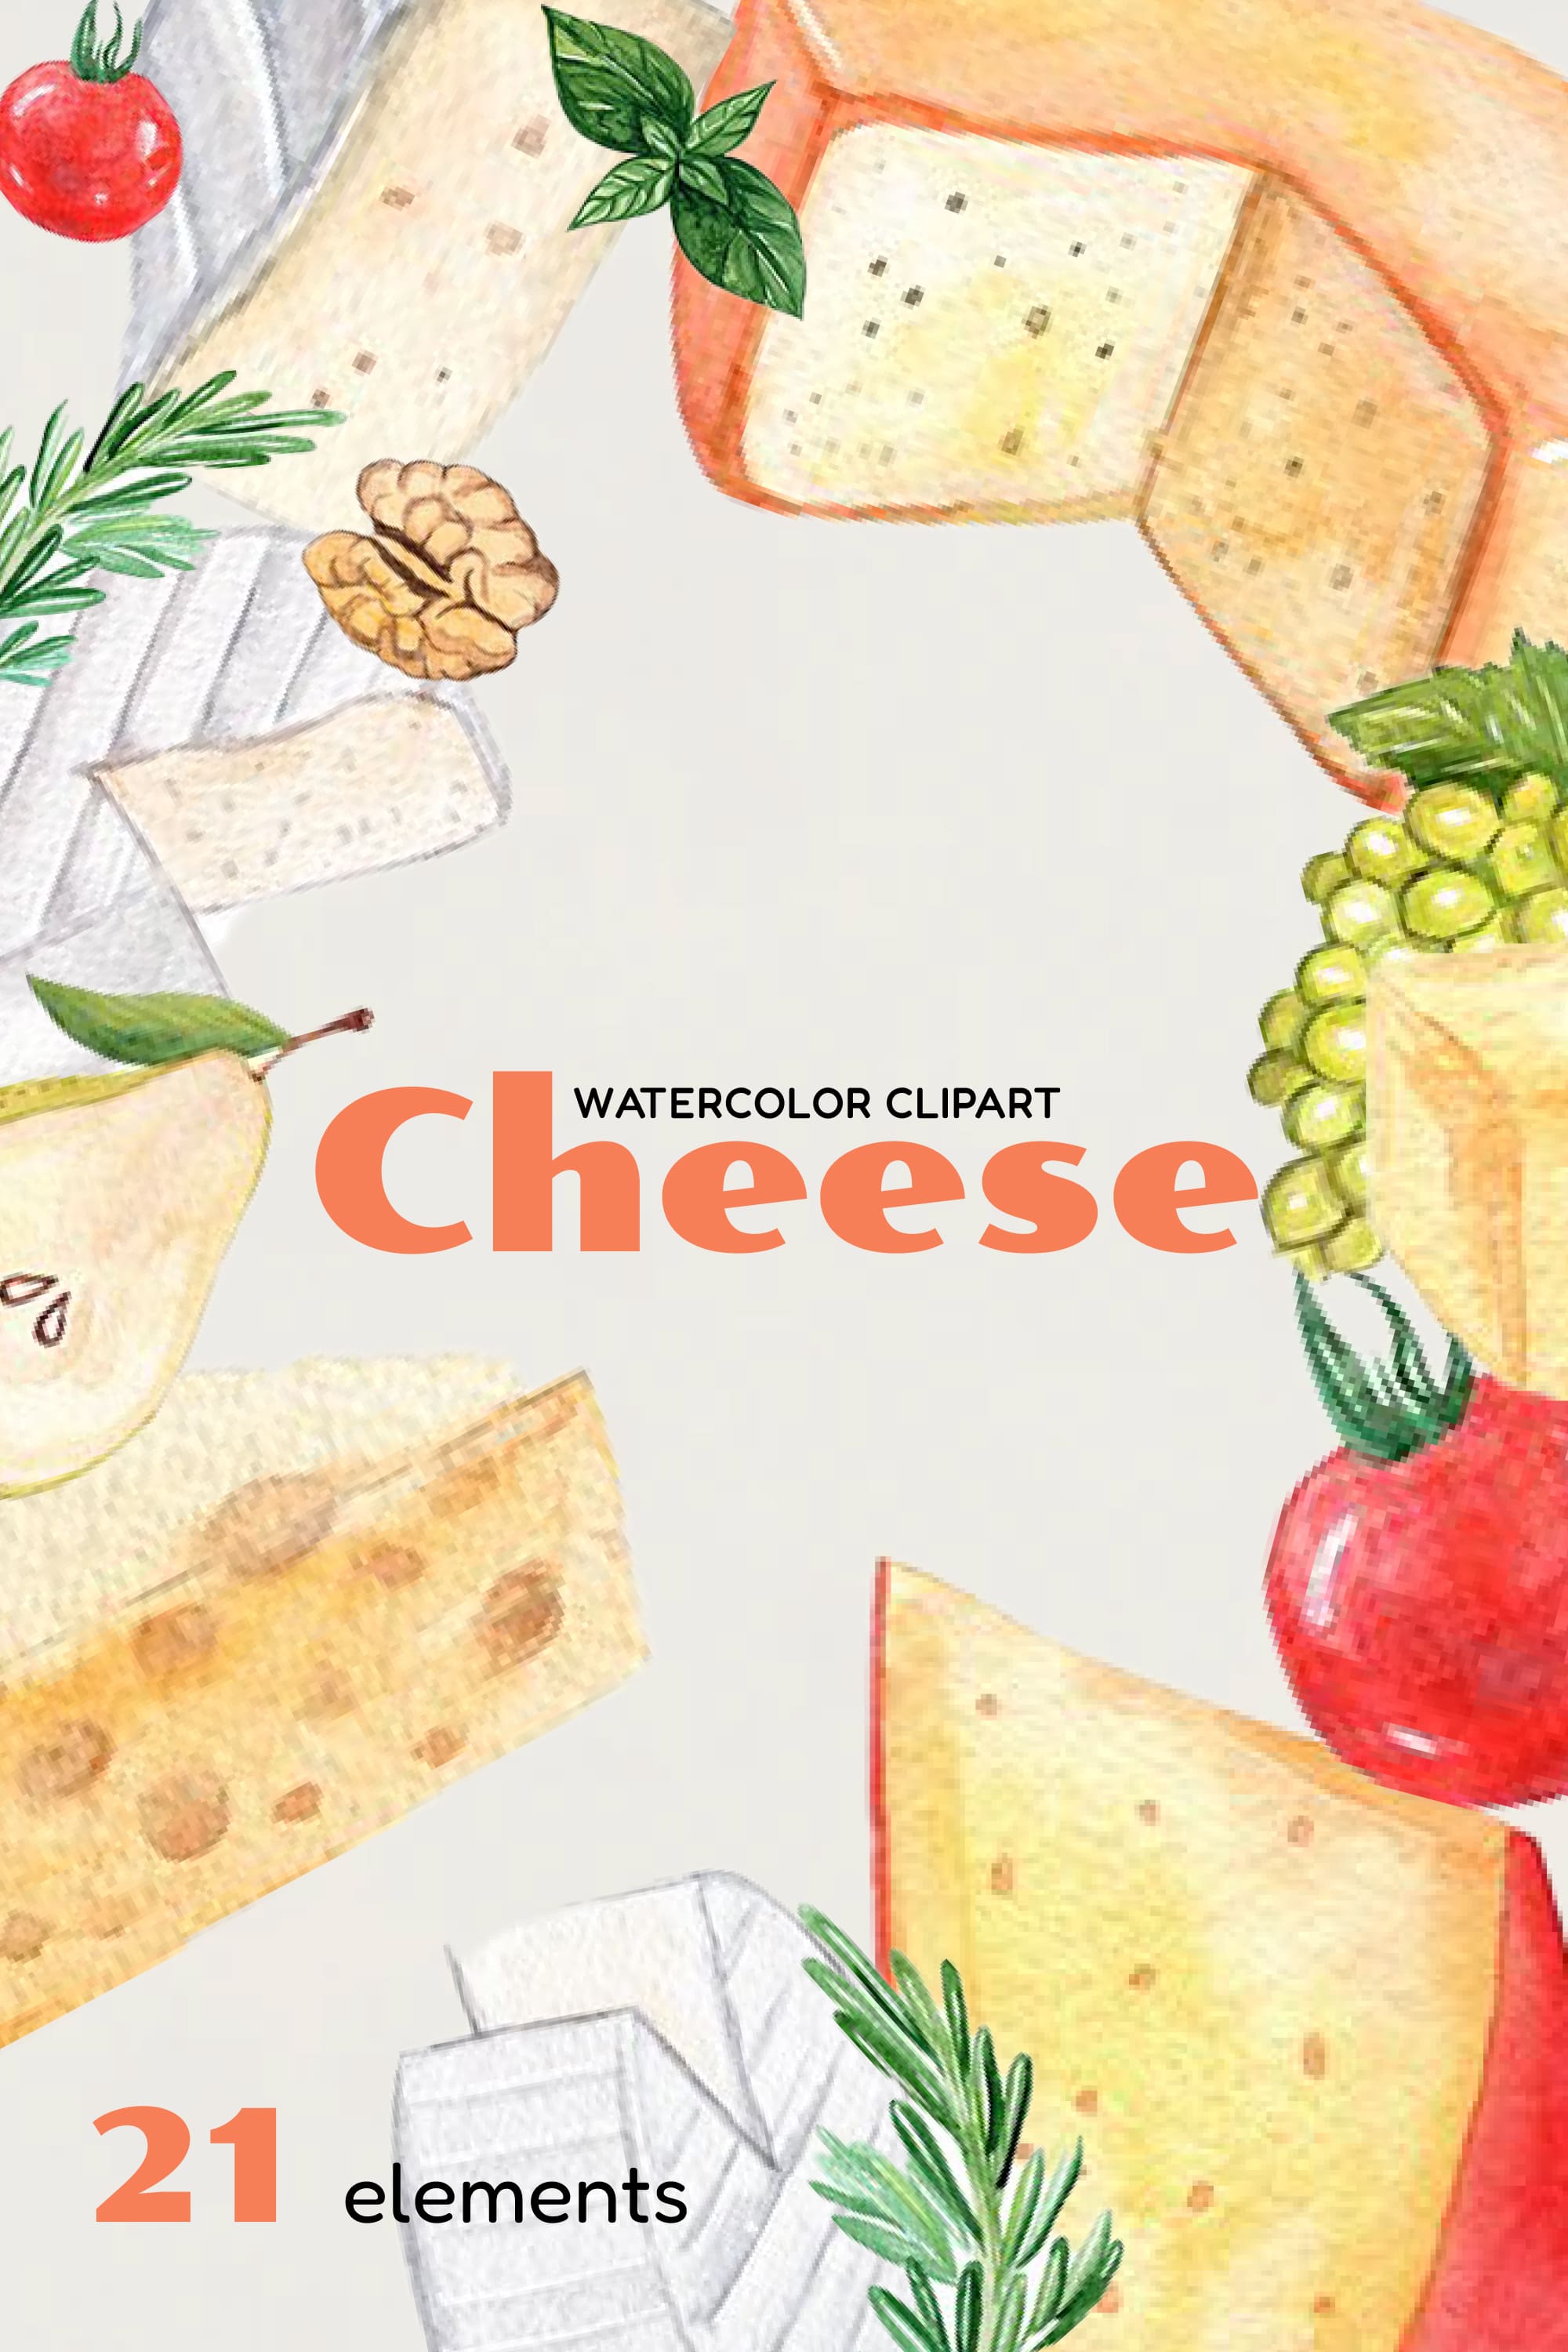 Collection of watercolor images of hard cheese and fruits.